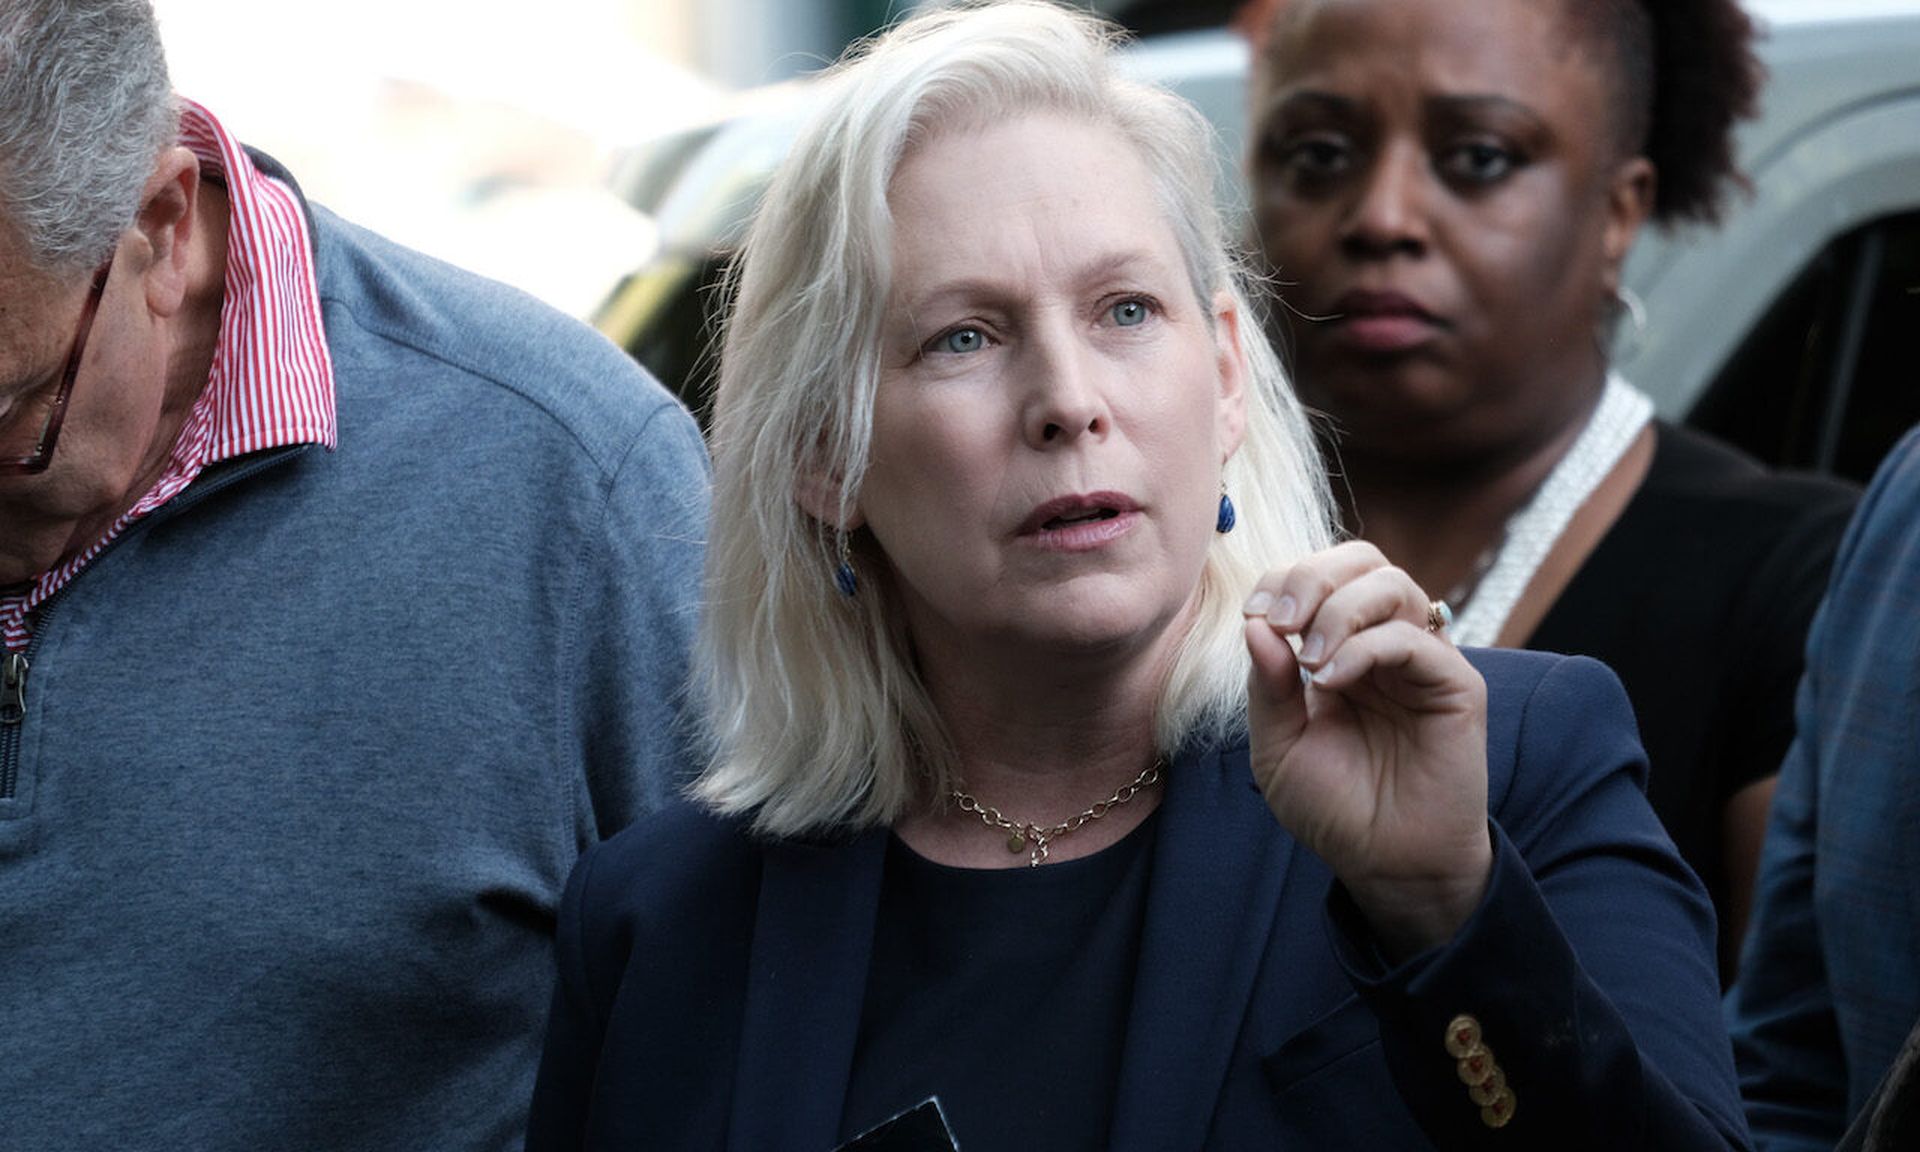 Today’s columnist, Conor Godfrey of the Tulsa Innovation Labs, says while Sen. Kirsten Gillibrand (D-N.Y.) may call for a Cyber Service Academy that will do for cyber what West Point did for the infantry, winning the cyber war will take cooperation from all aspects of society. (Photo by Spencer Platt/Getty Images)